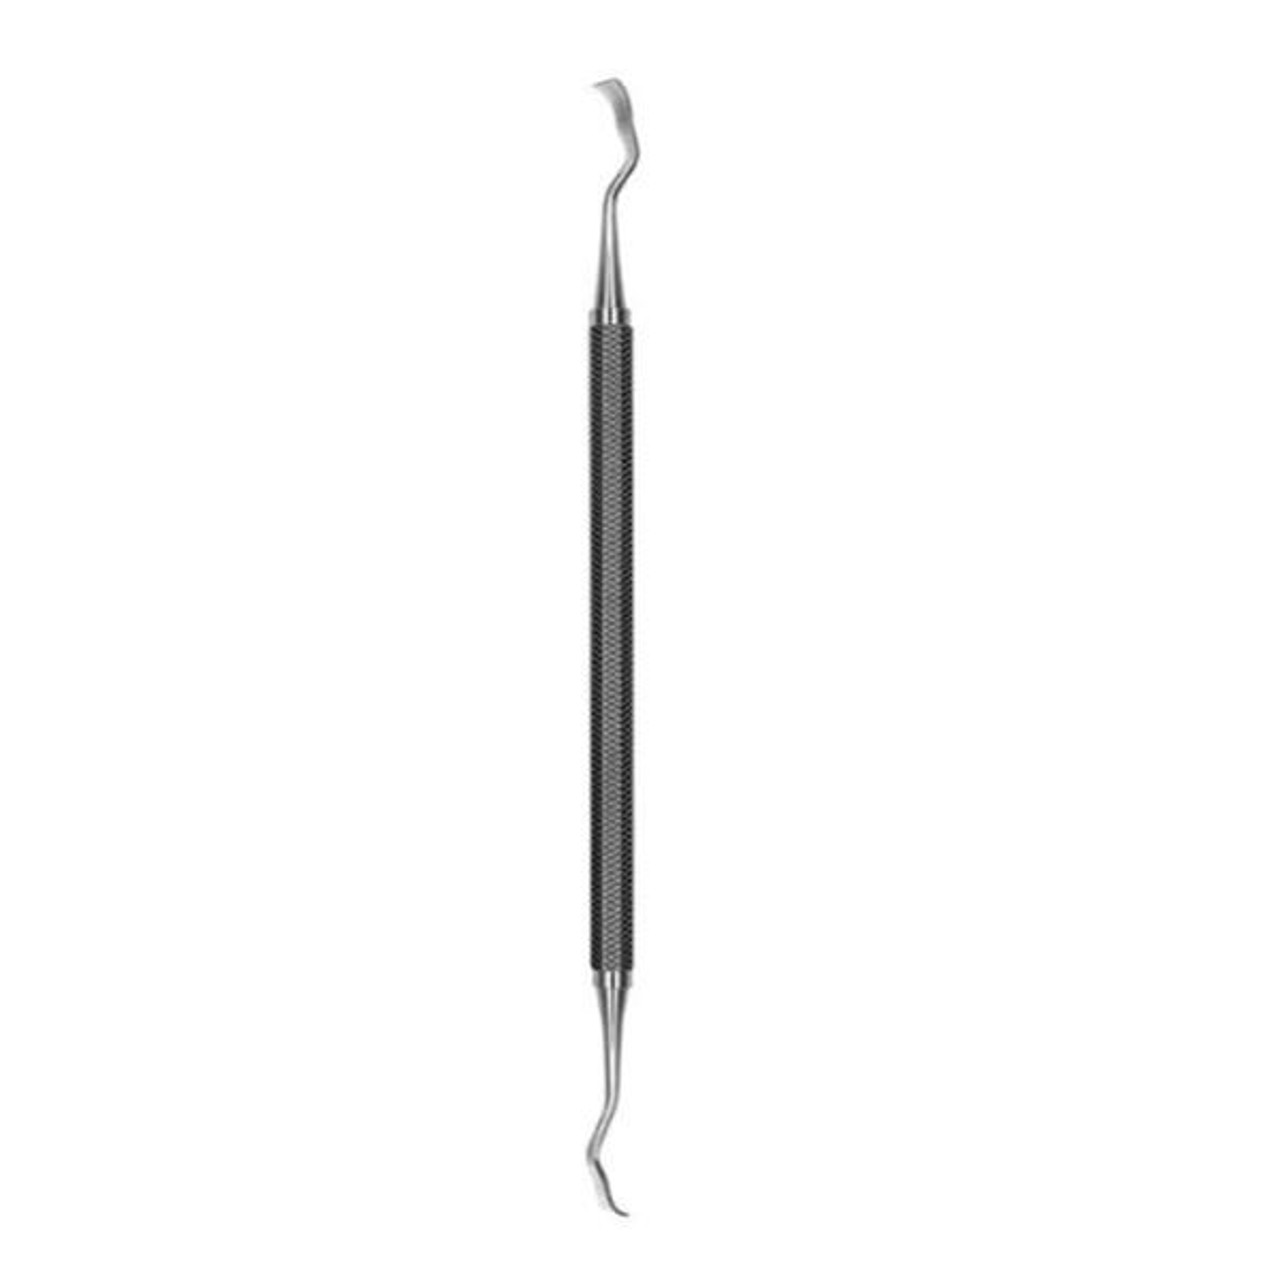 Hu-Friedy - 13K/13KL Double End Surgical Chisel - #6 Satin Steel Handle